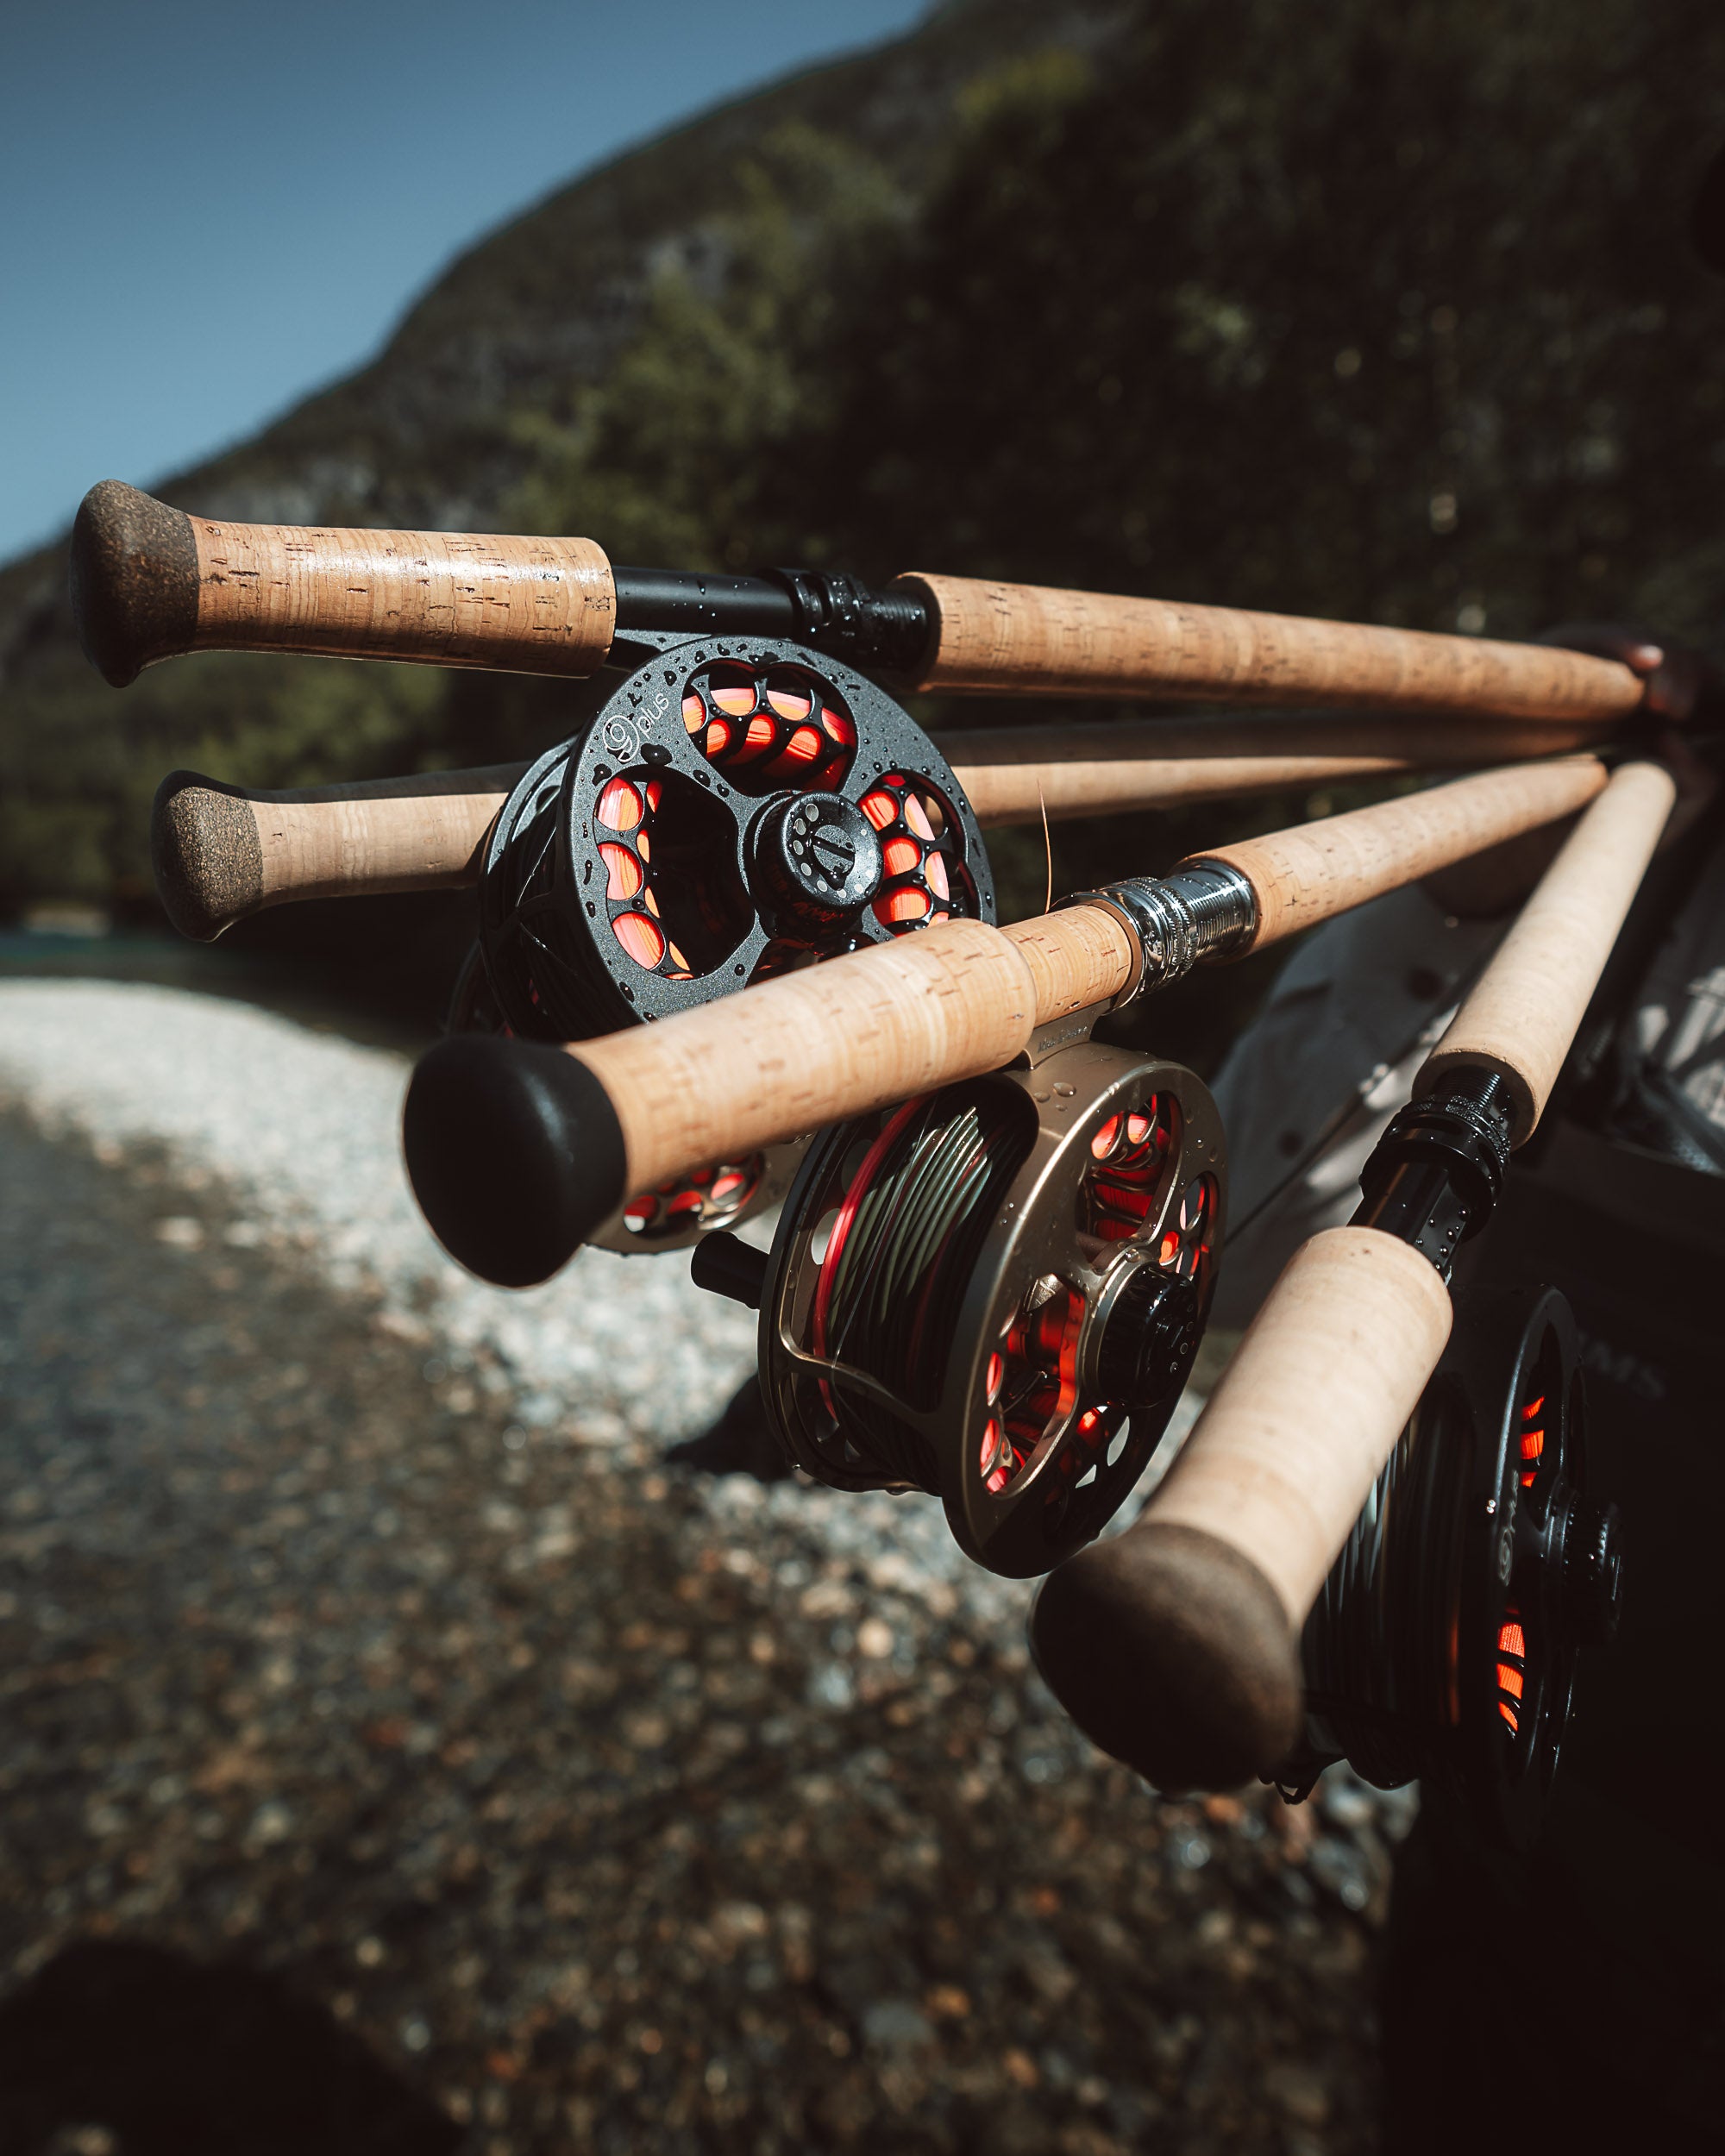 Fly Fishing Rod Weight, Action, and Flex Explained